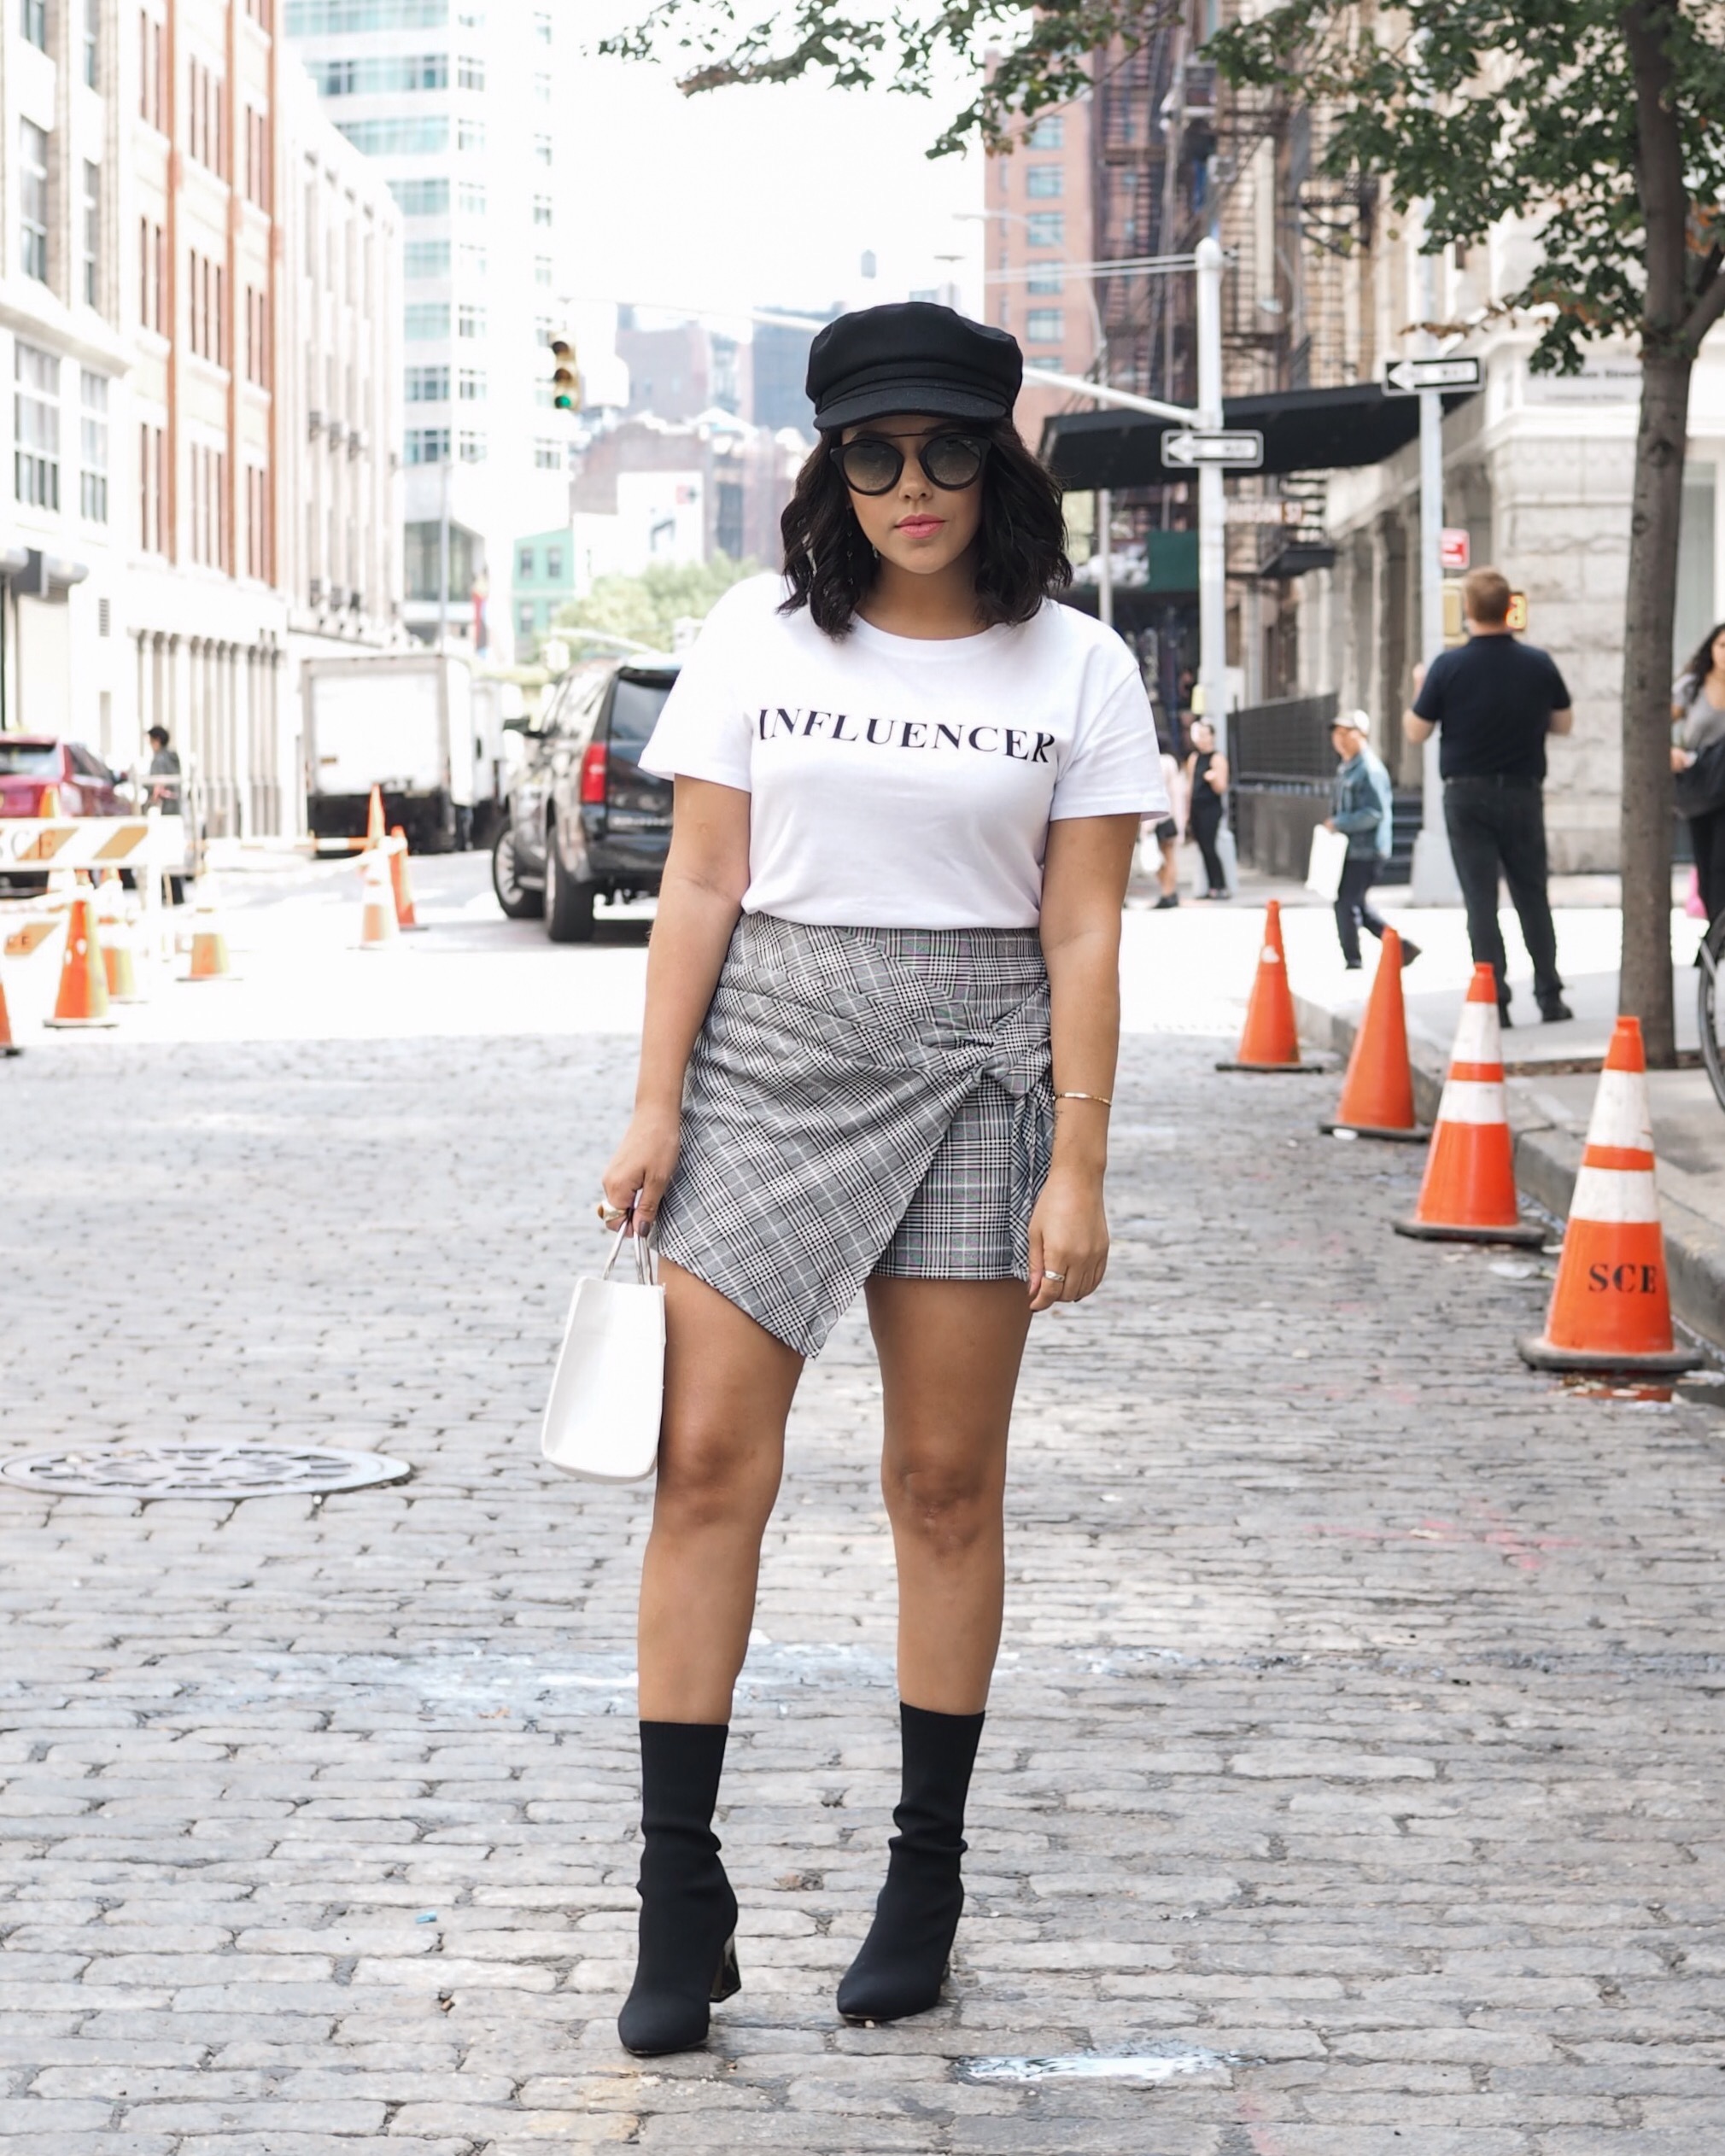 naty michele wearing influencer tee and sock boots at nyfw